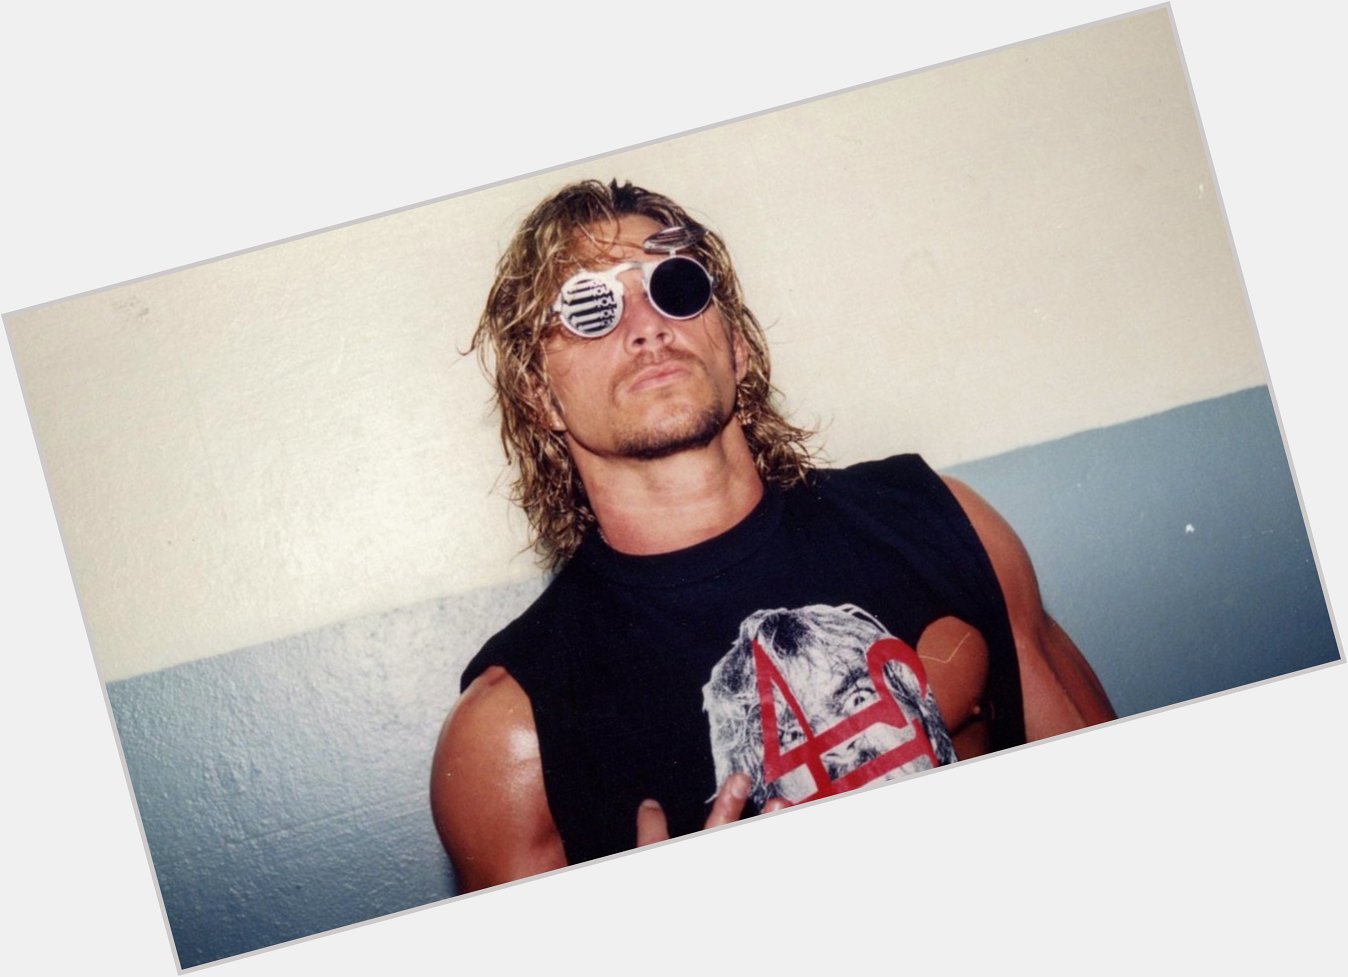 Like every day, today is a really great day to watch some Brian Pillman.

Happy Birthday to the Loose Cannon. 